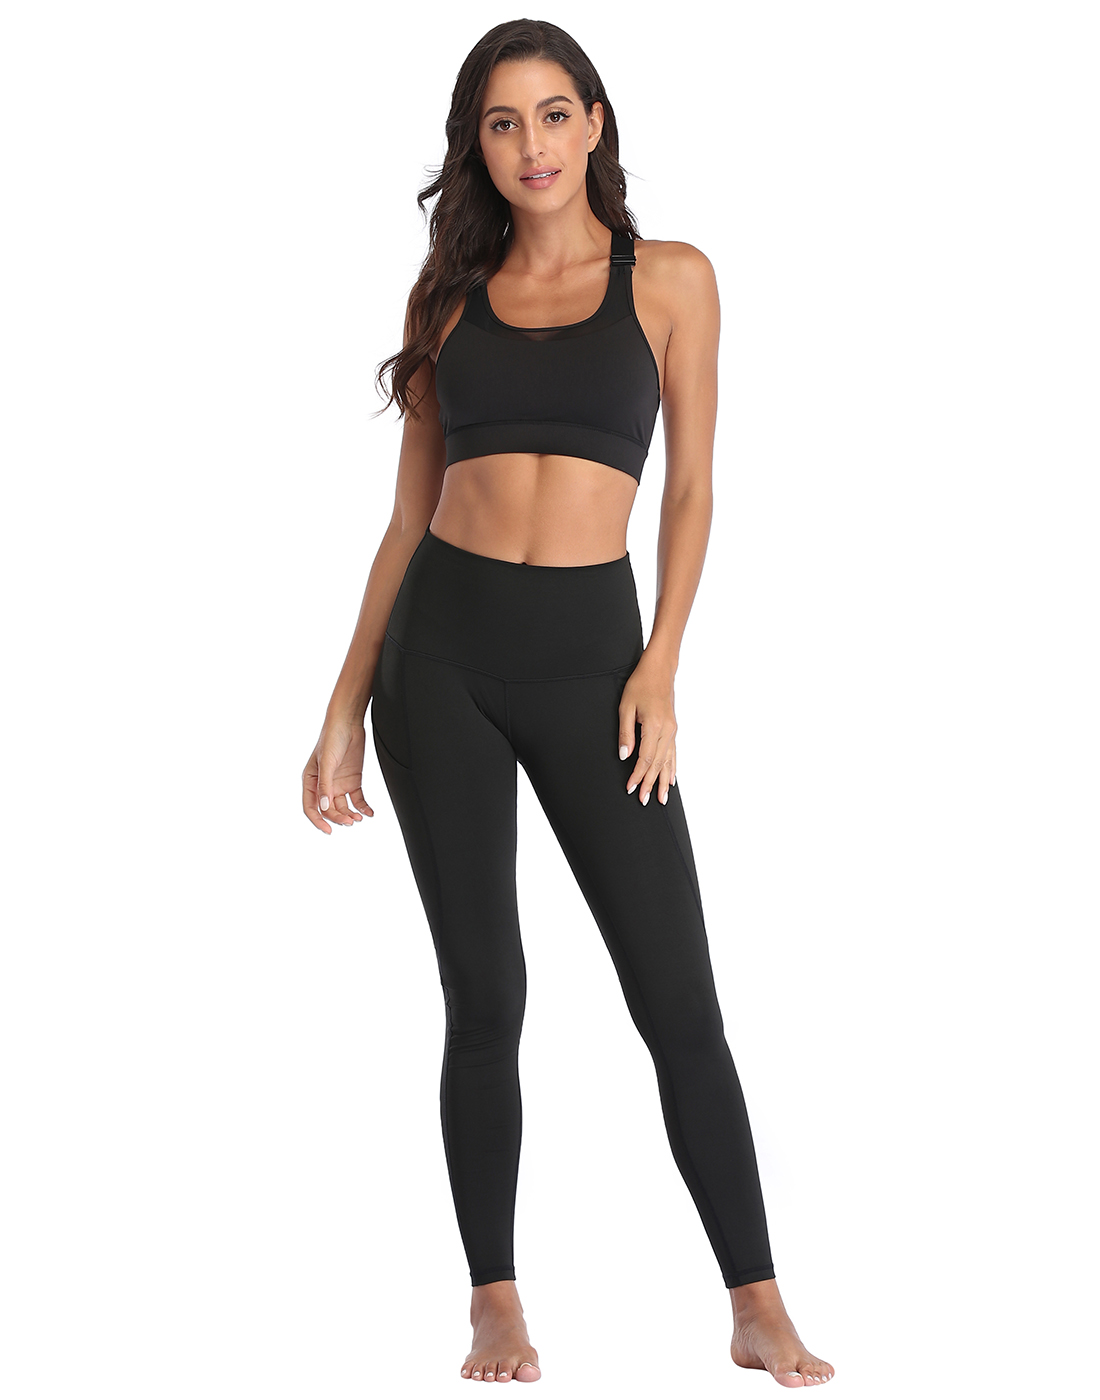 HDE Yoga Pants with Pockets for Women High Waisted Tummy Control Leggings (Black, L) - image 5 of 6